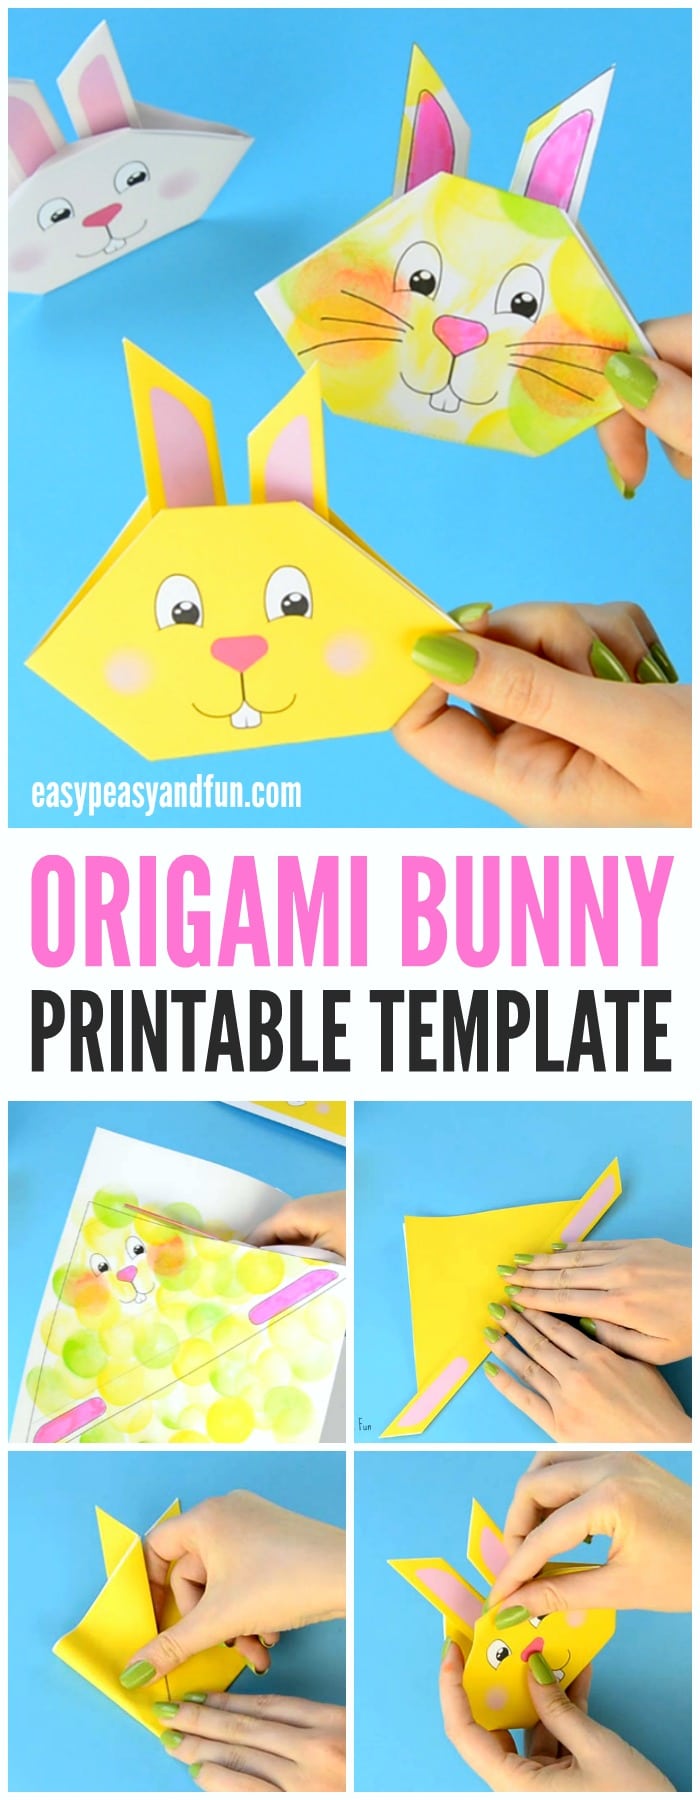 Cute Origami Bunny Template Craft Idea for Kids to Make